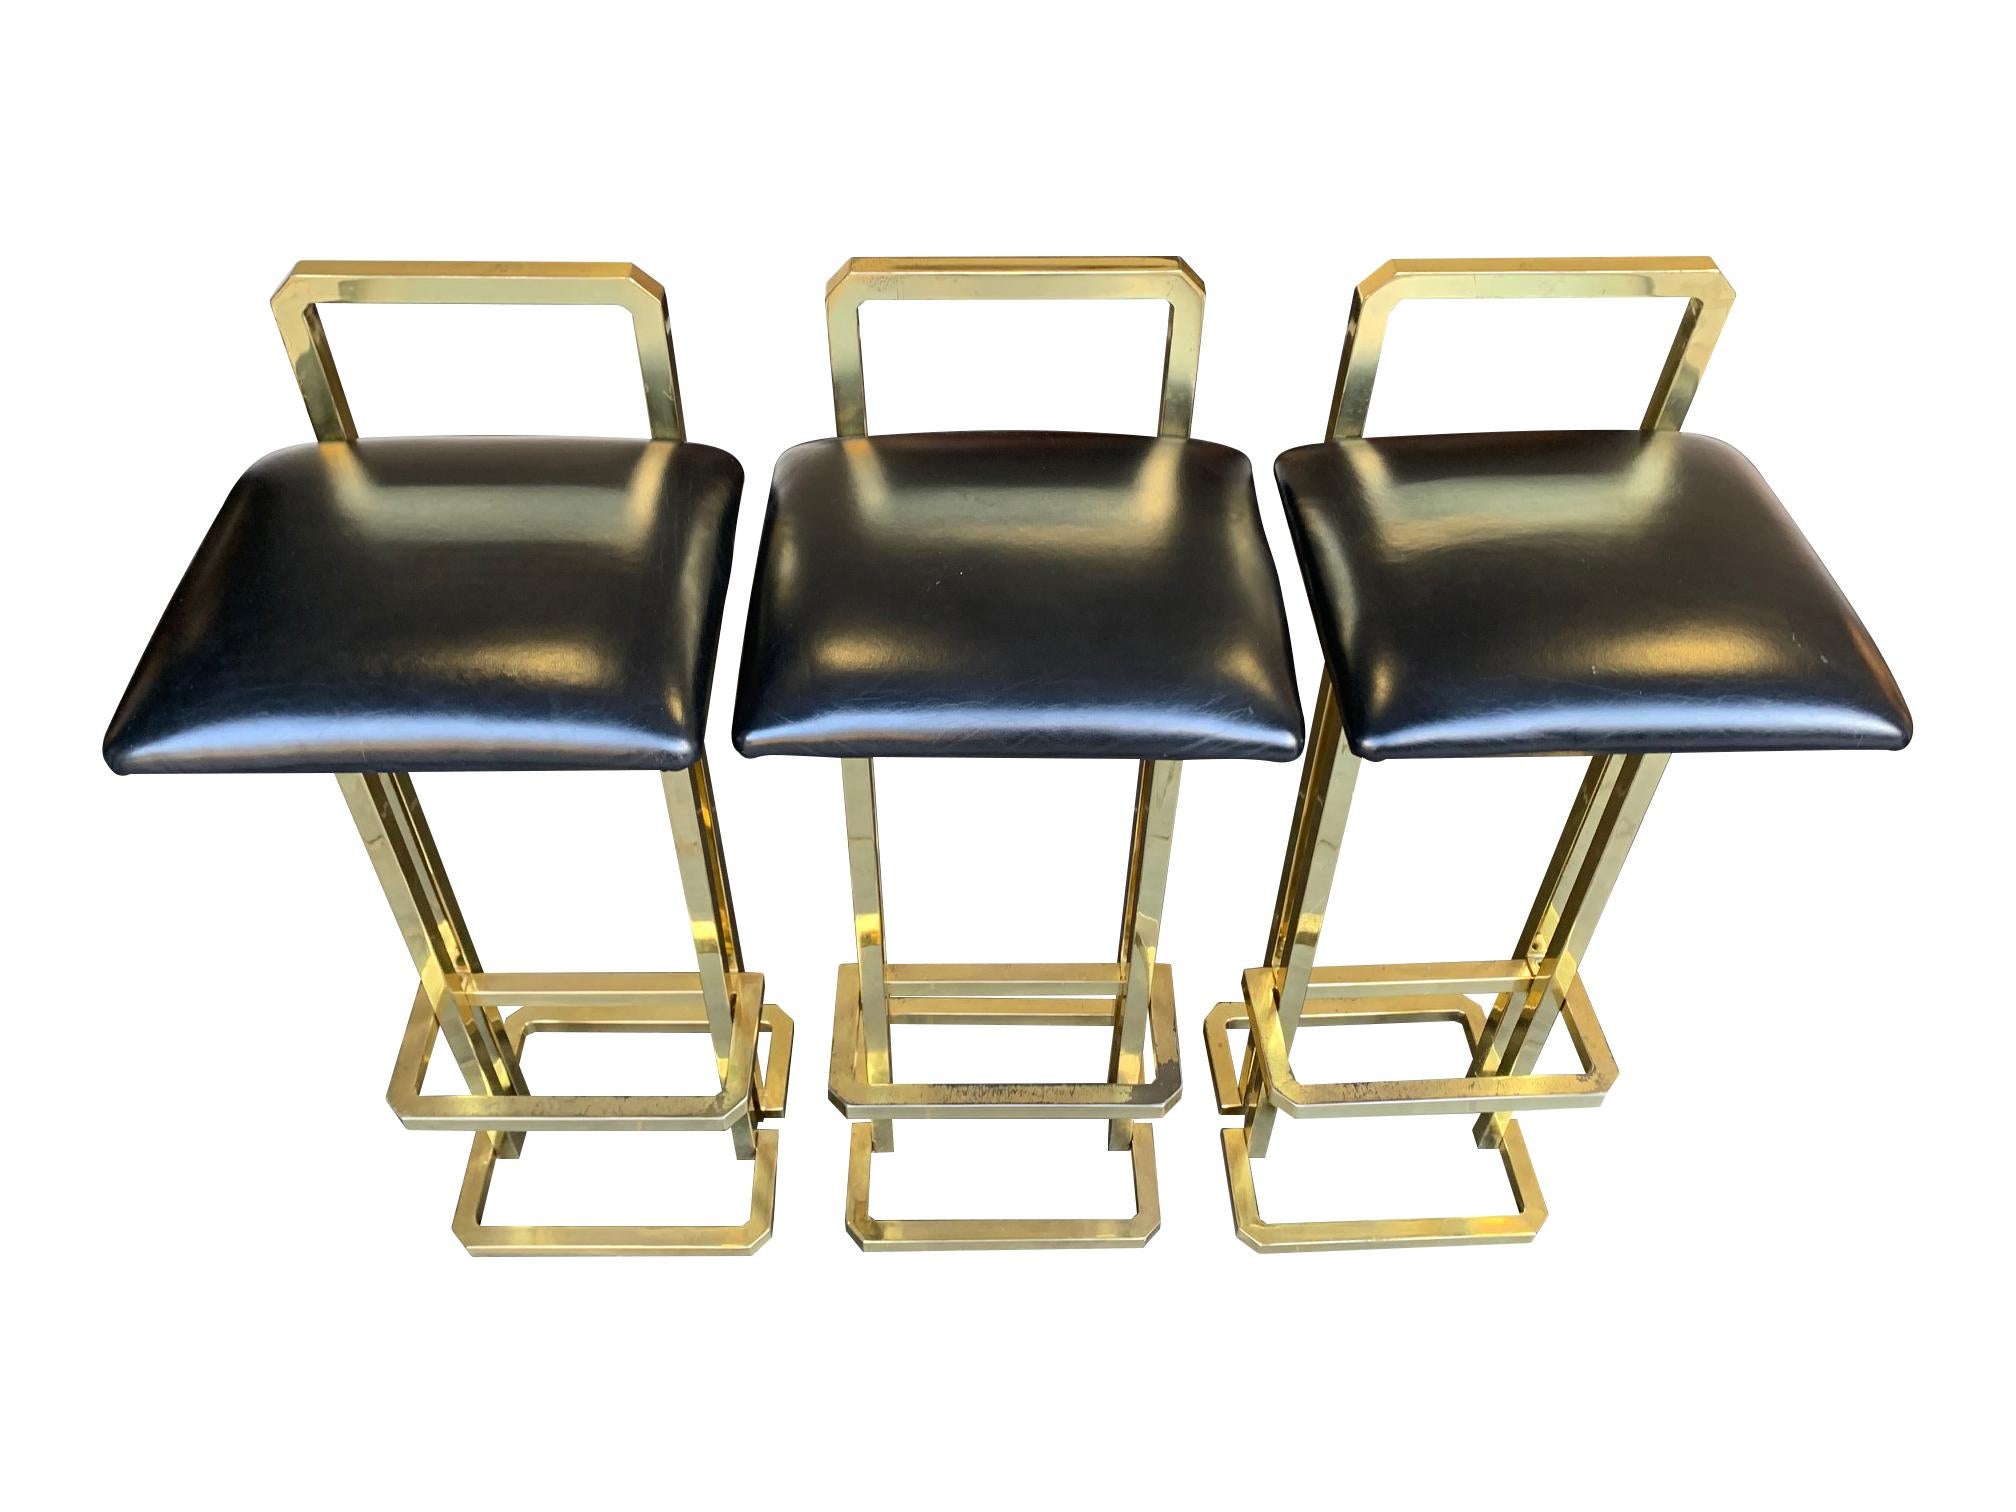 Set of 3 Maison Jansen Style Gilt Metal Stools with Black Leather Seat Pads For Sale 13